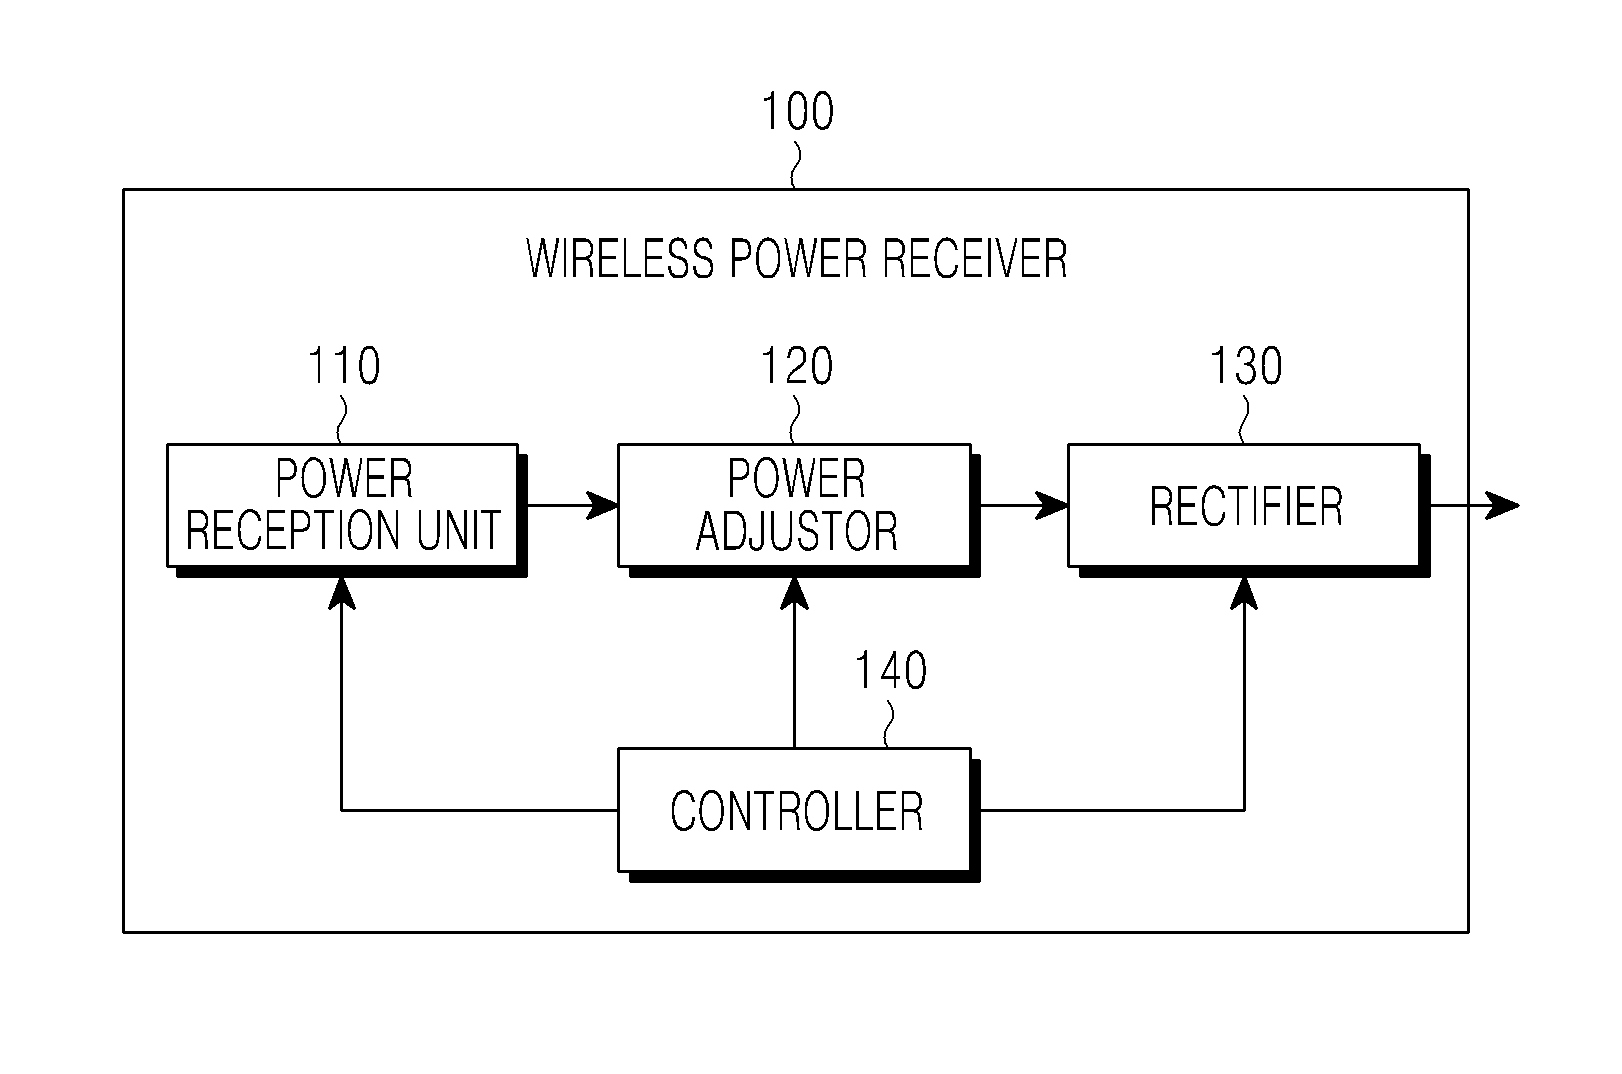 Wireless power receiver for controlling wireless power by using switch